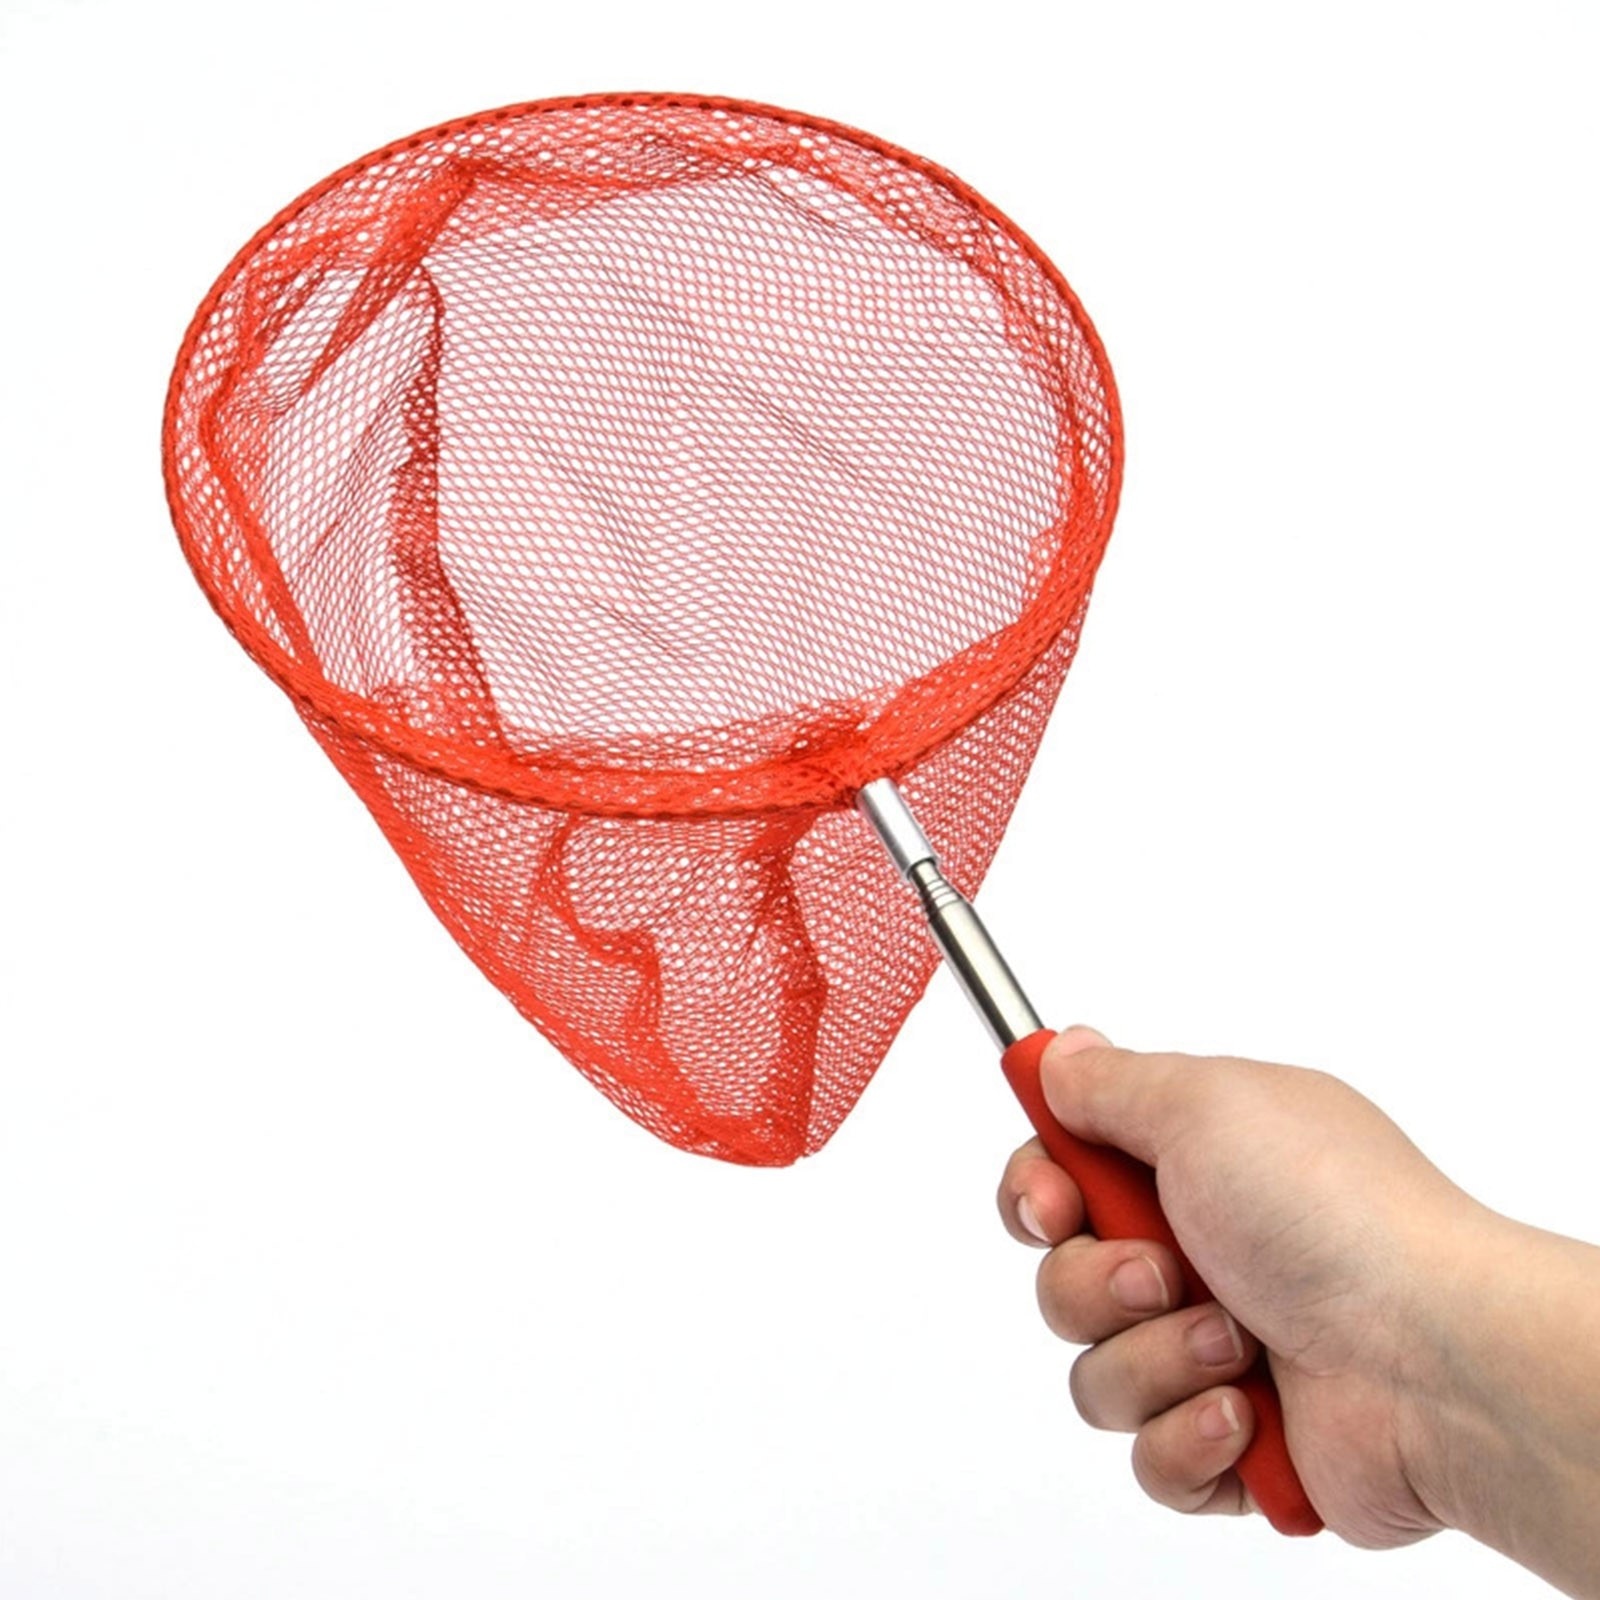 Retractable Fishing Insect Butterfly Dragonfly Insect Mesh Tool